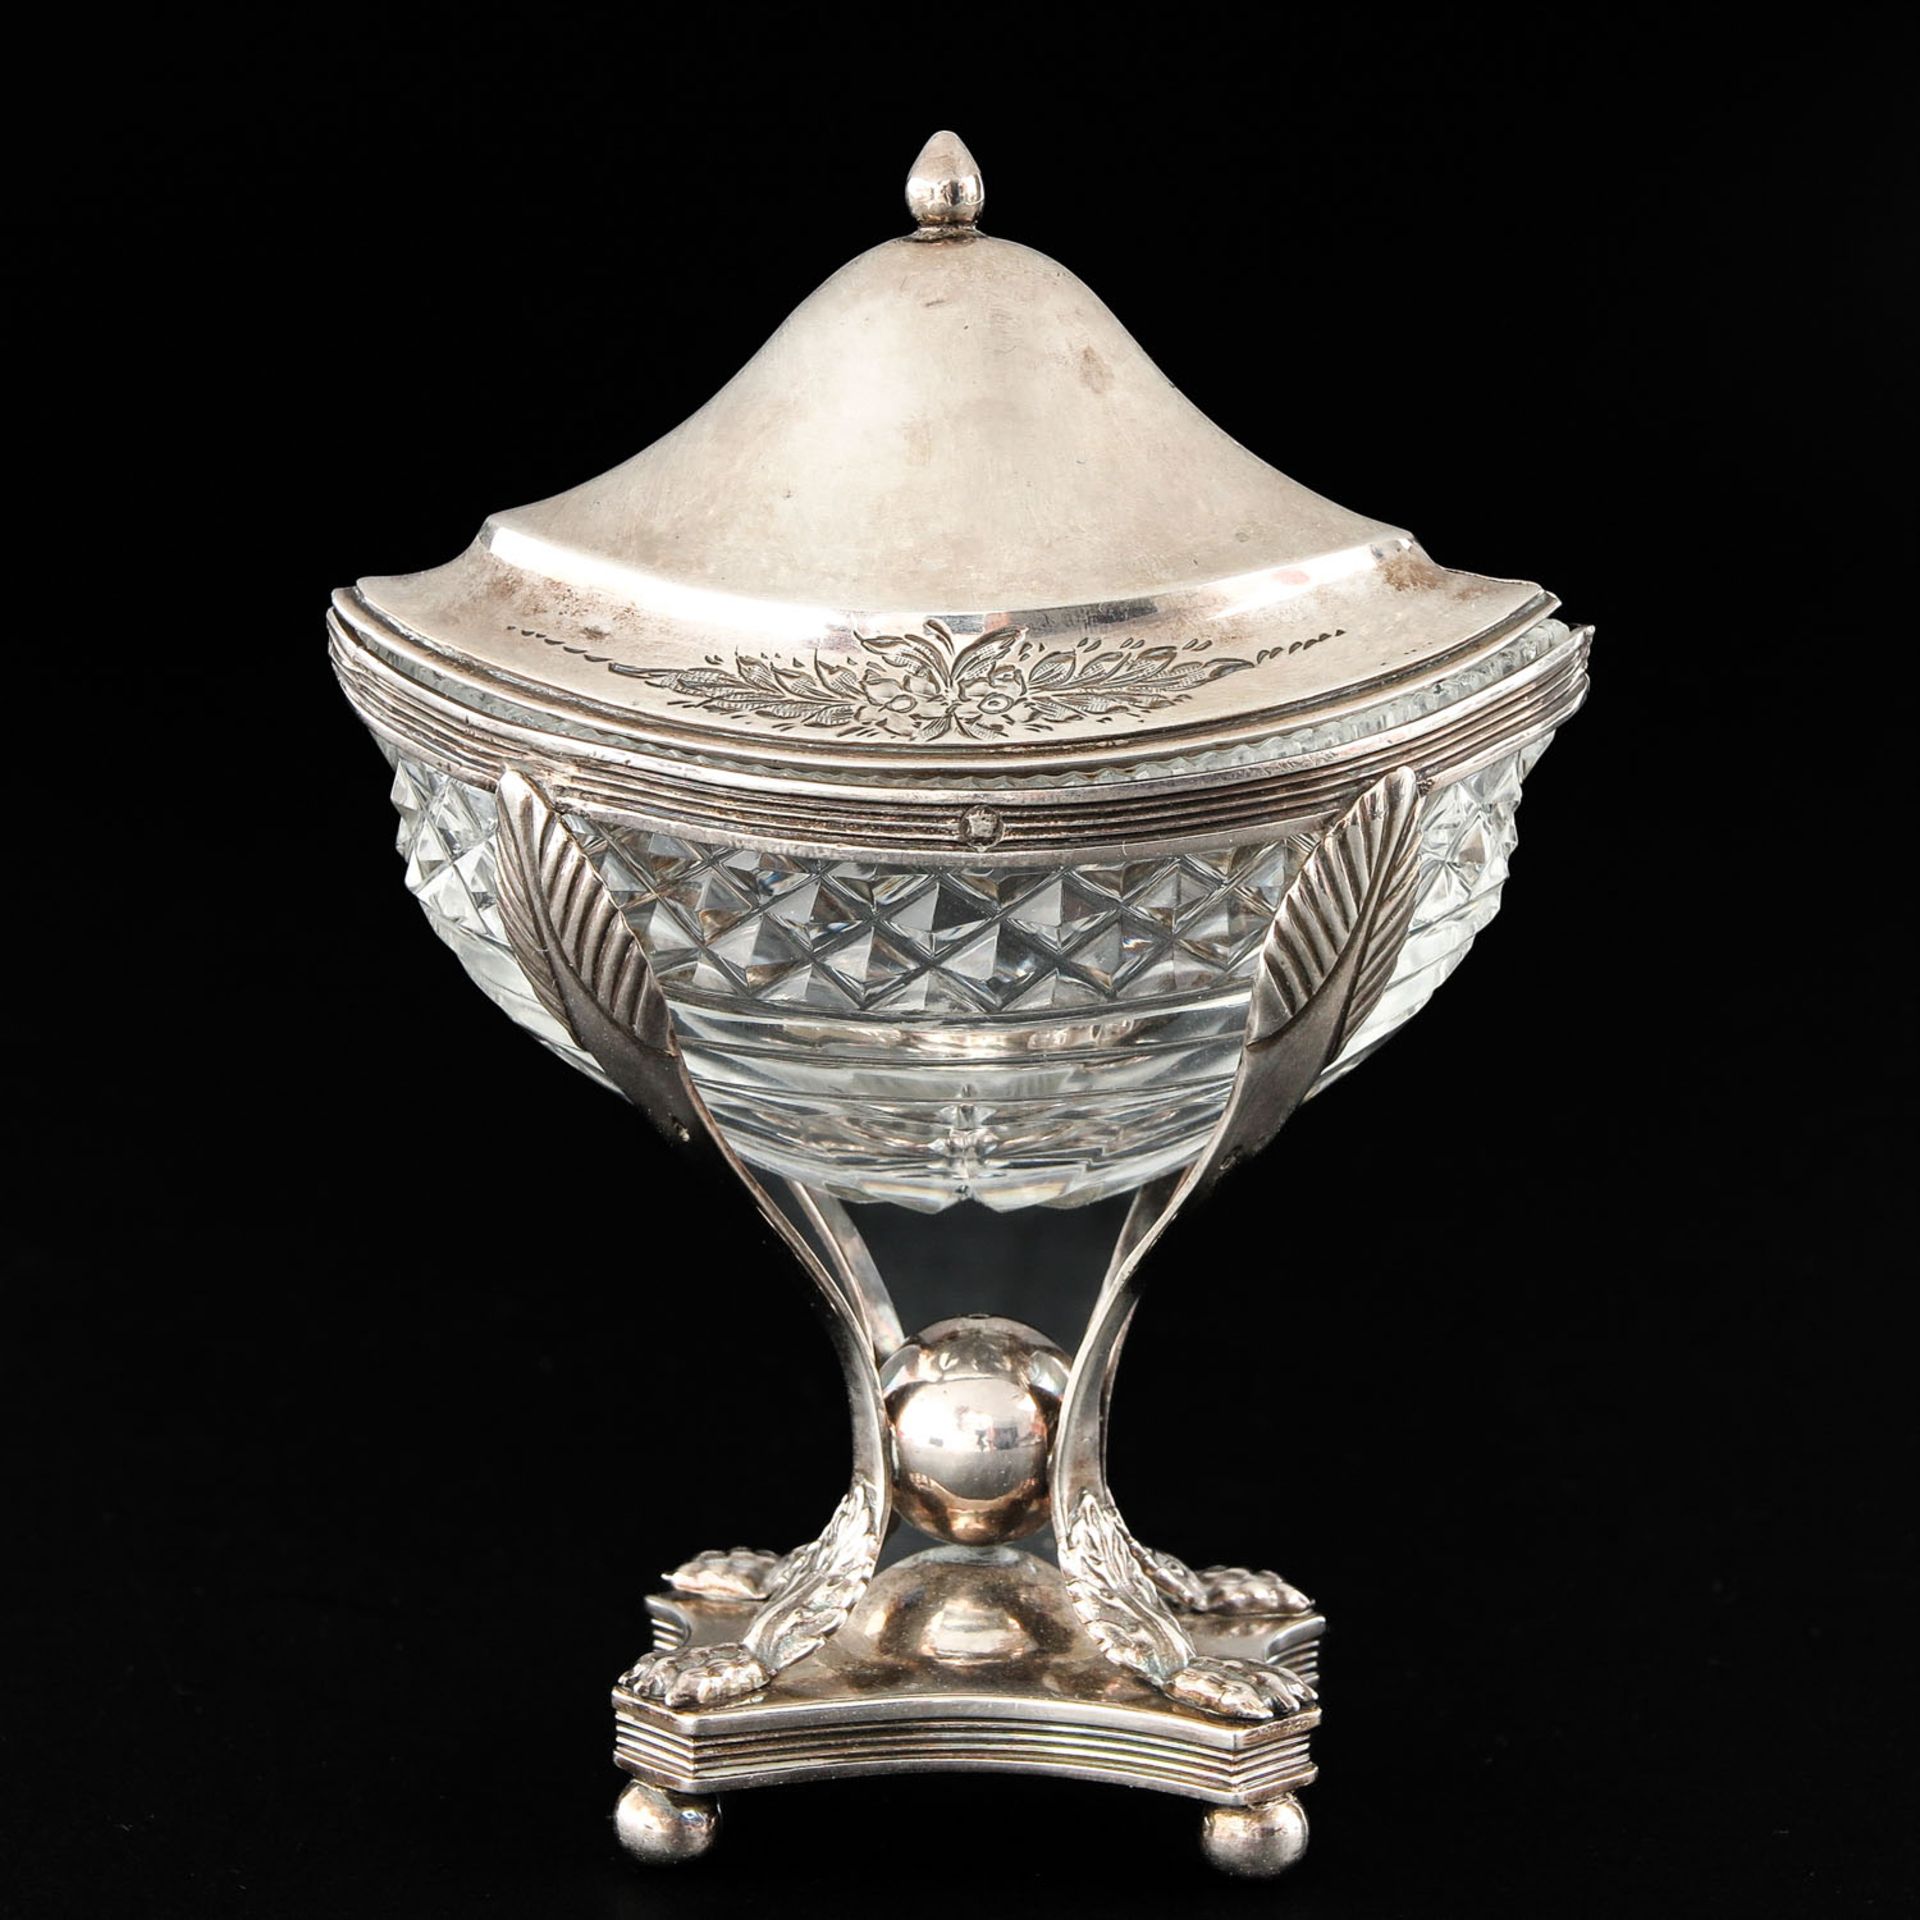 A Silver and Crystal Mustard Pot